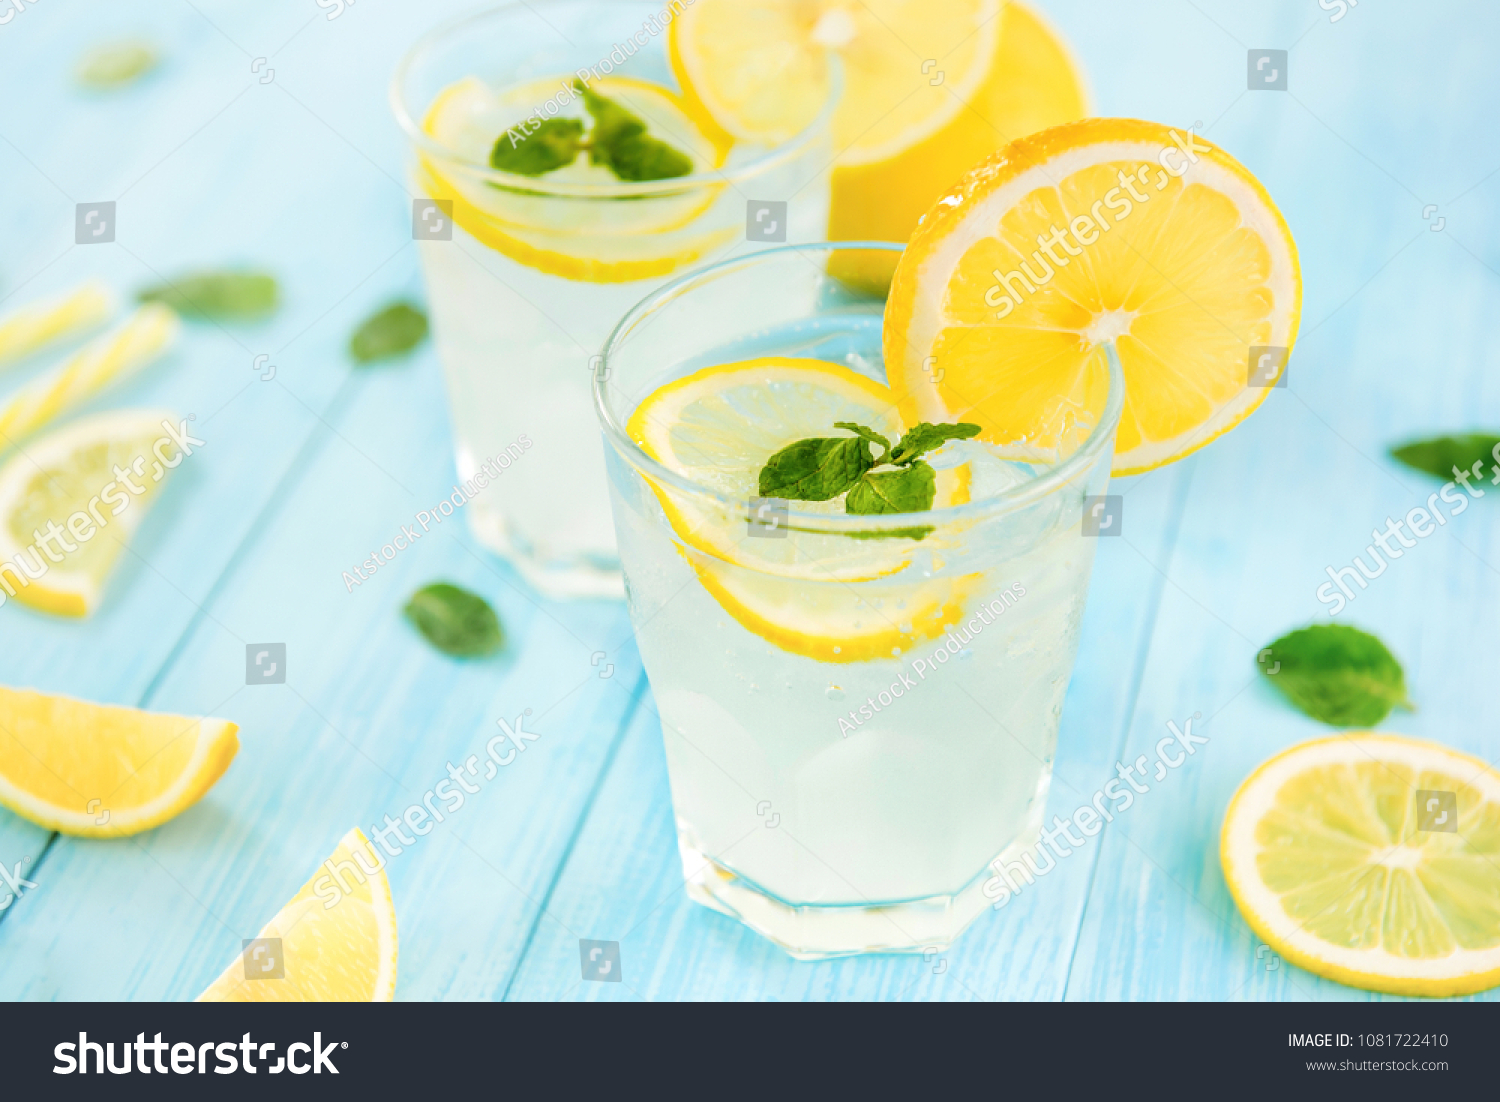 Refreshing drinks for summer, cold sweet and sour lemonade juice with ice cubes in the glasses garnished with sliced fresh lemons #1081722410